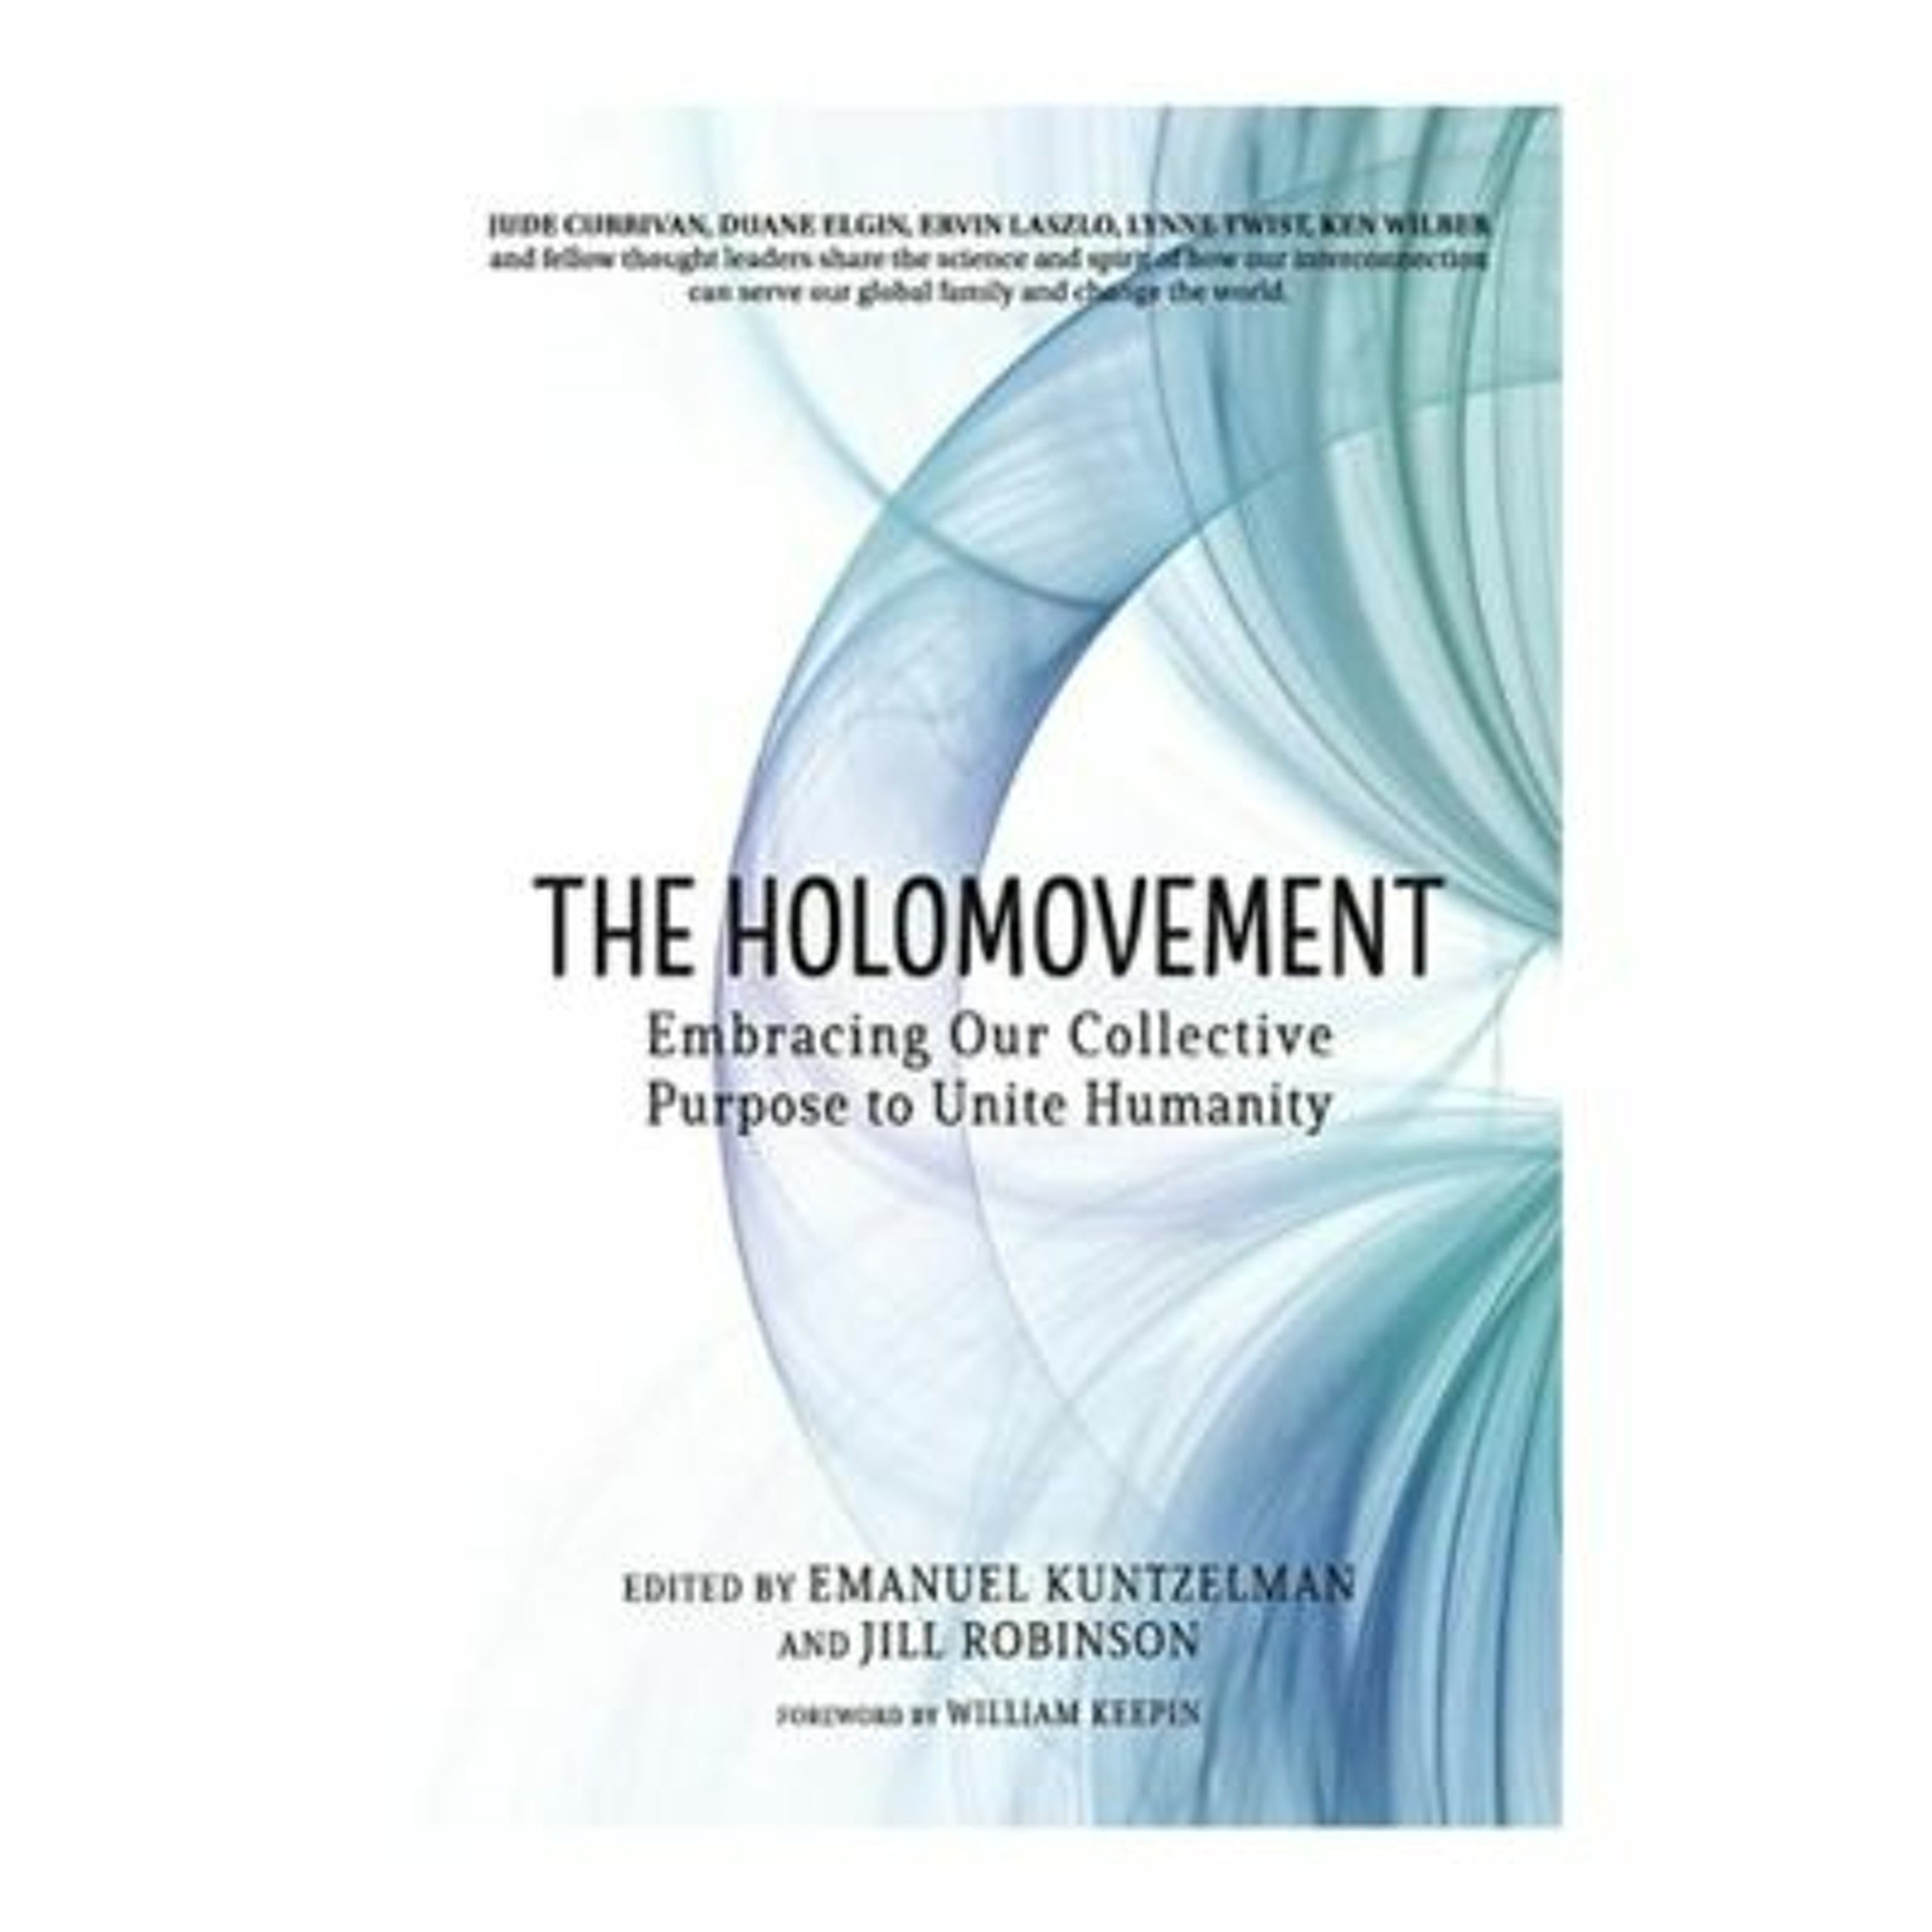 Podcast 1026: The Holomovement with Joni Carley, Emanuel Kuntzelman and Phil Clothier